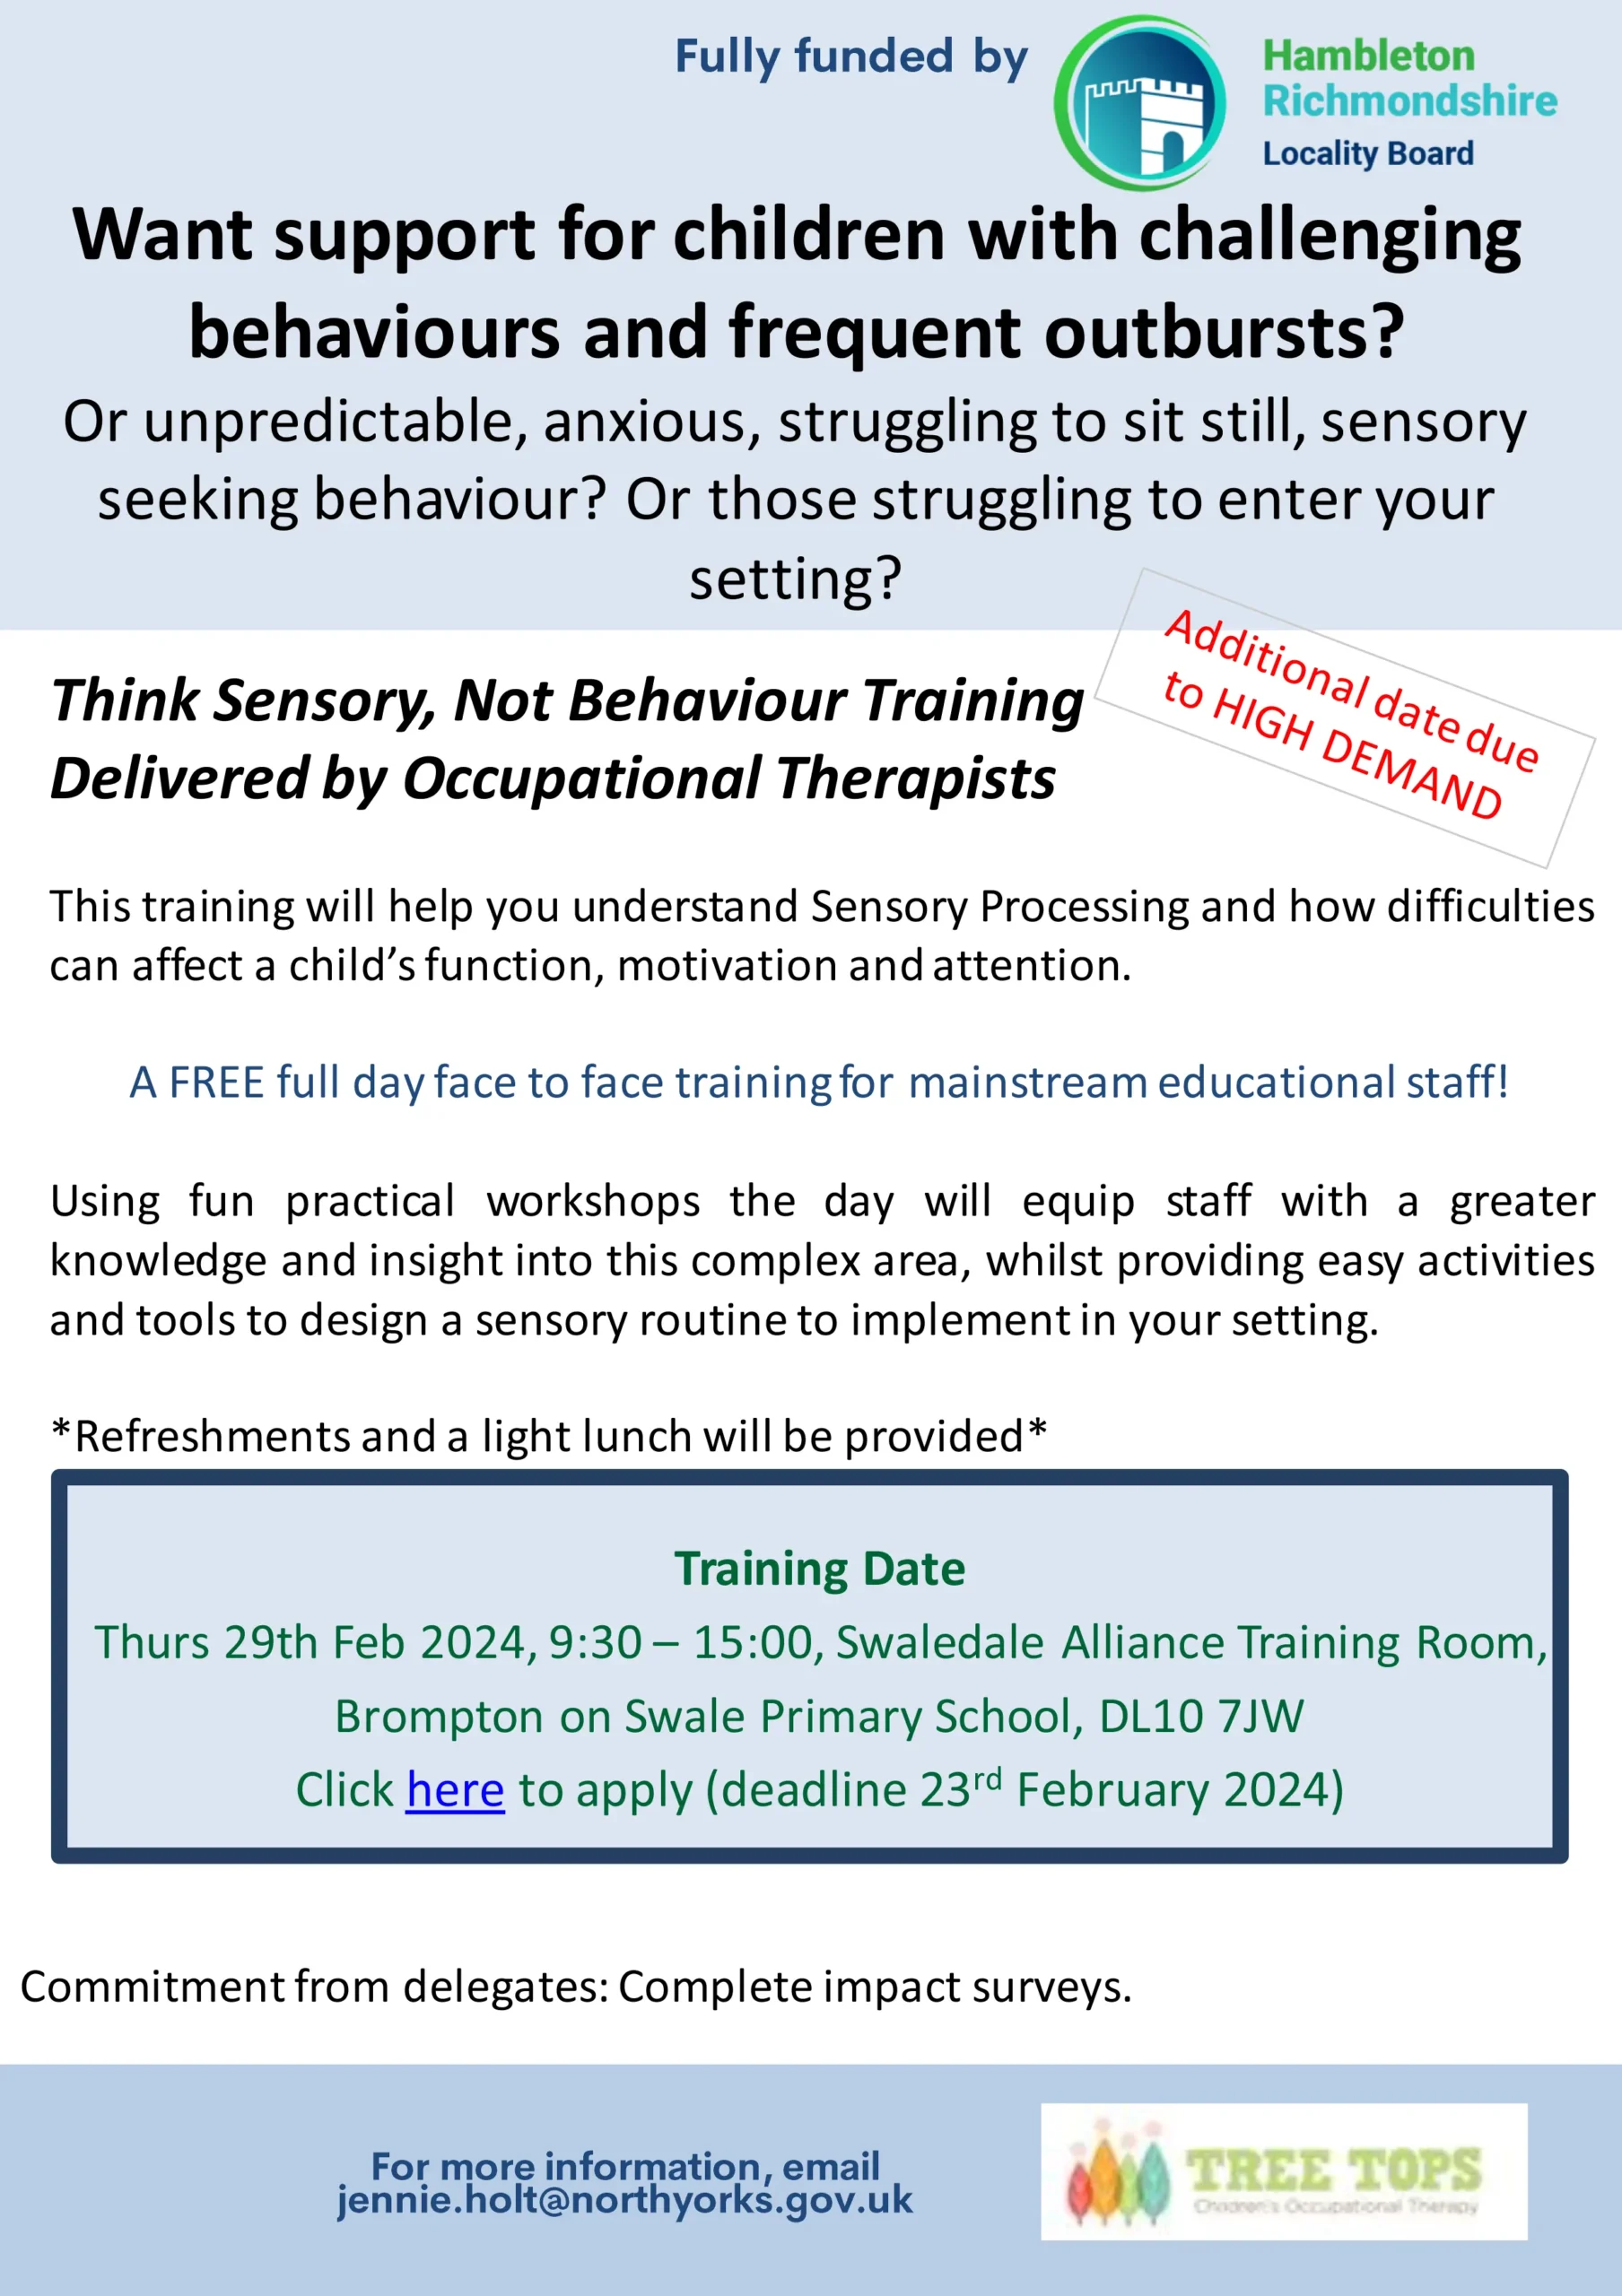 Want support for children with challenging behaviours and frequent outbursts?  
Or unpredictable, anxious, struggling to sit still, sensory seeking behaviour? Or those struggling to enter your setting?


Face to face training 29th February 2024

Available to schools
